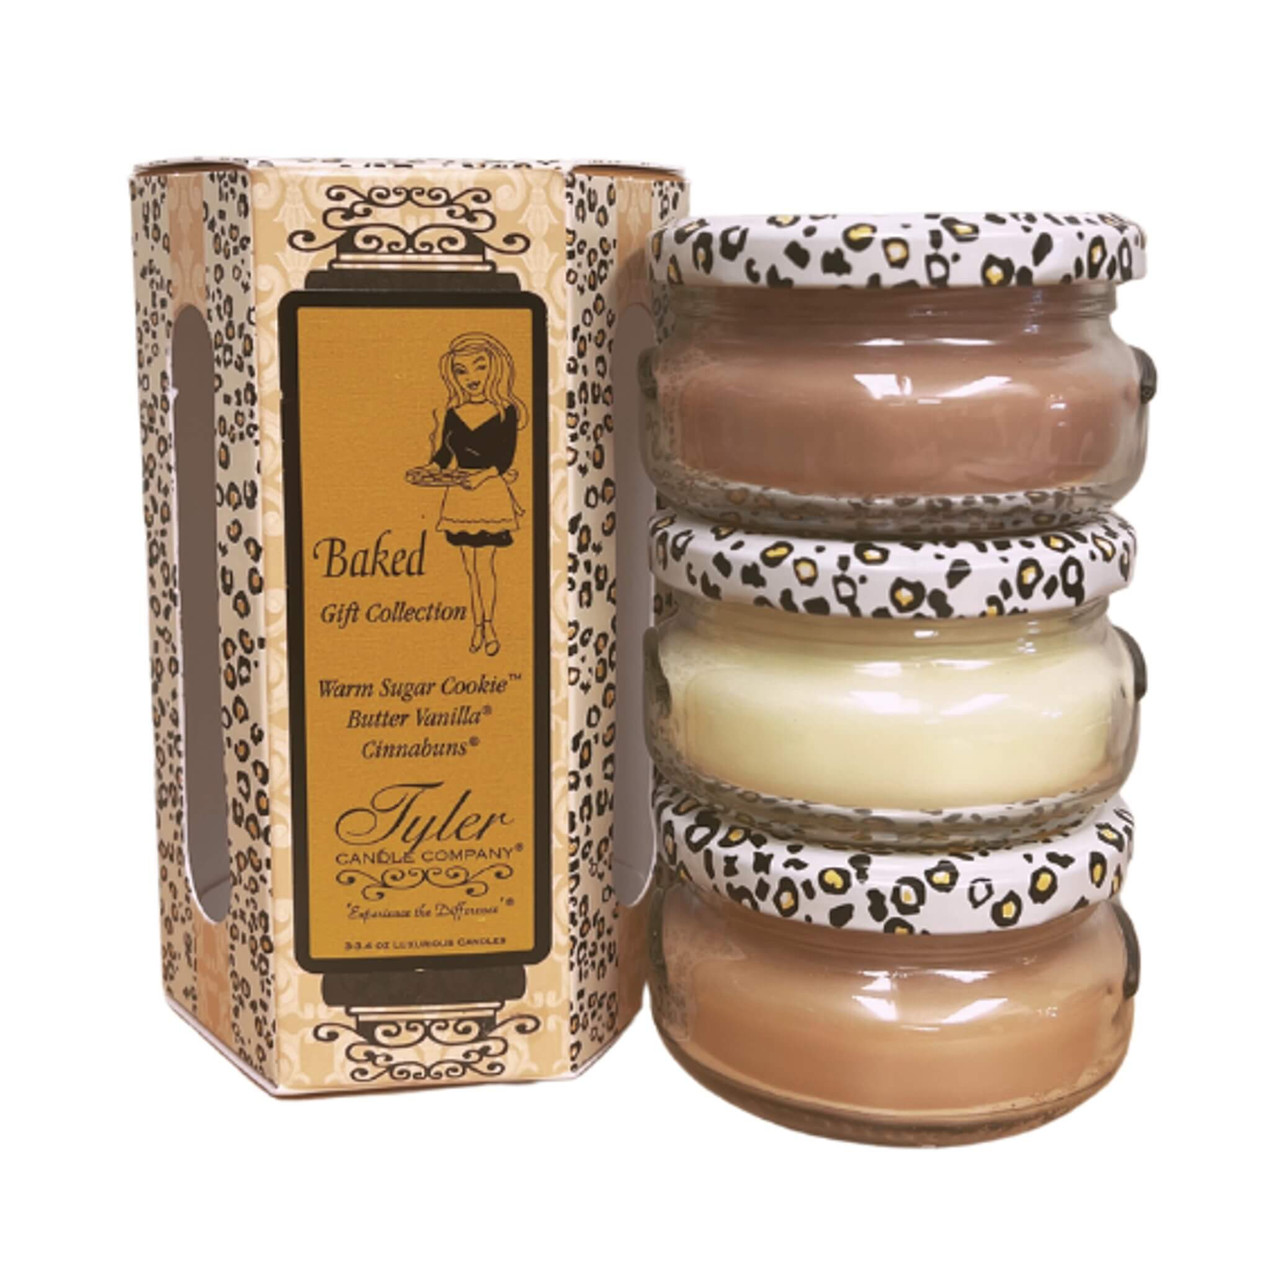 Tyler Candle Company Baked Gift Collection Warm Sugar Cookie Butter Vanilla Cinnabuns